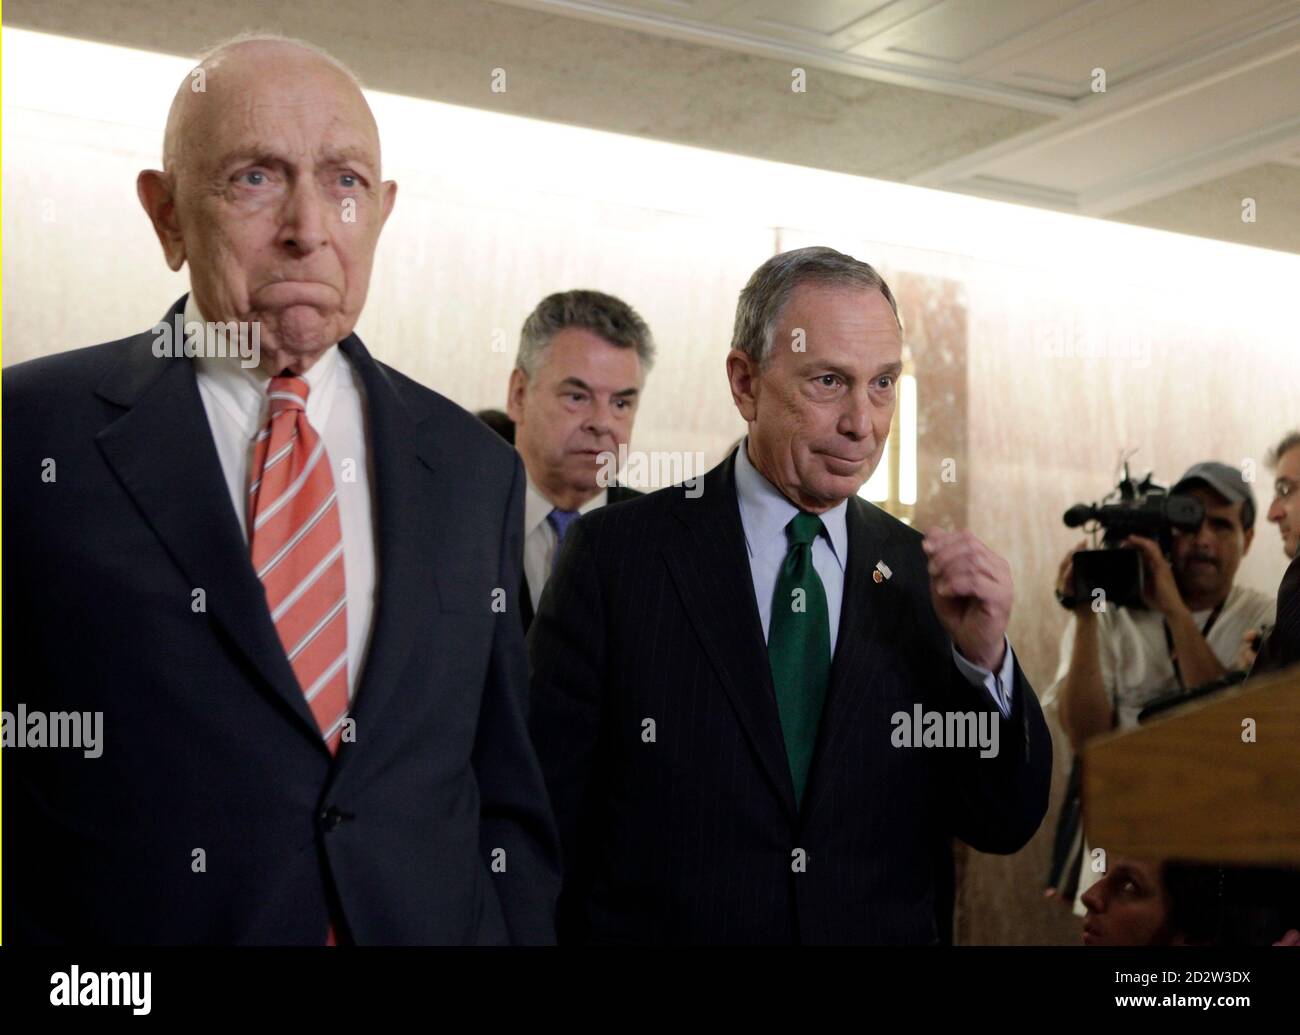 Sen. Frank Lautenberg (D-NJ), Rep. Peter King (R-NY) and New York City Mayor Michael Bloomberg (L-R) meet with reporters after their testimony before the Senate Homeland Security and Governmental Affairs Committee on Capitol Hill in Washington May 5, 2010. REUTERS/Yuri Gripas (UNITED STATES - Tags: POLITICS) Stock Photo